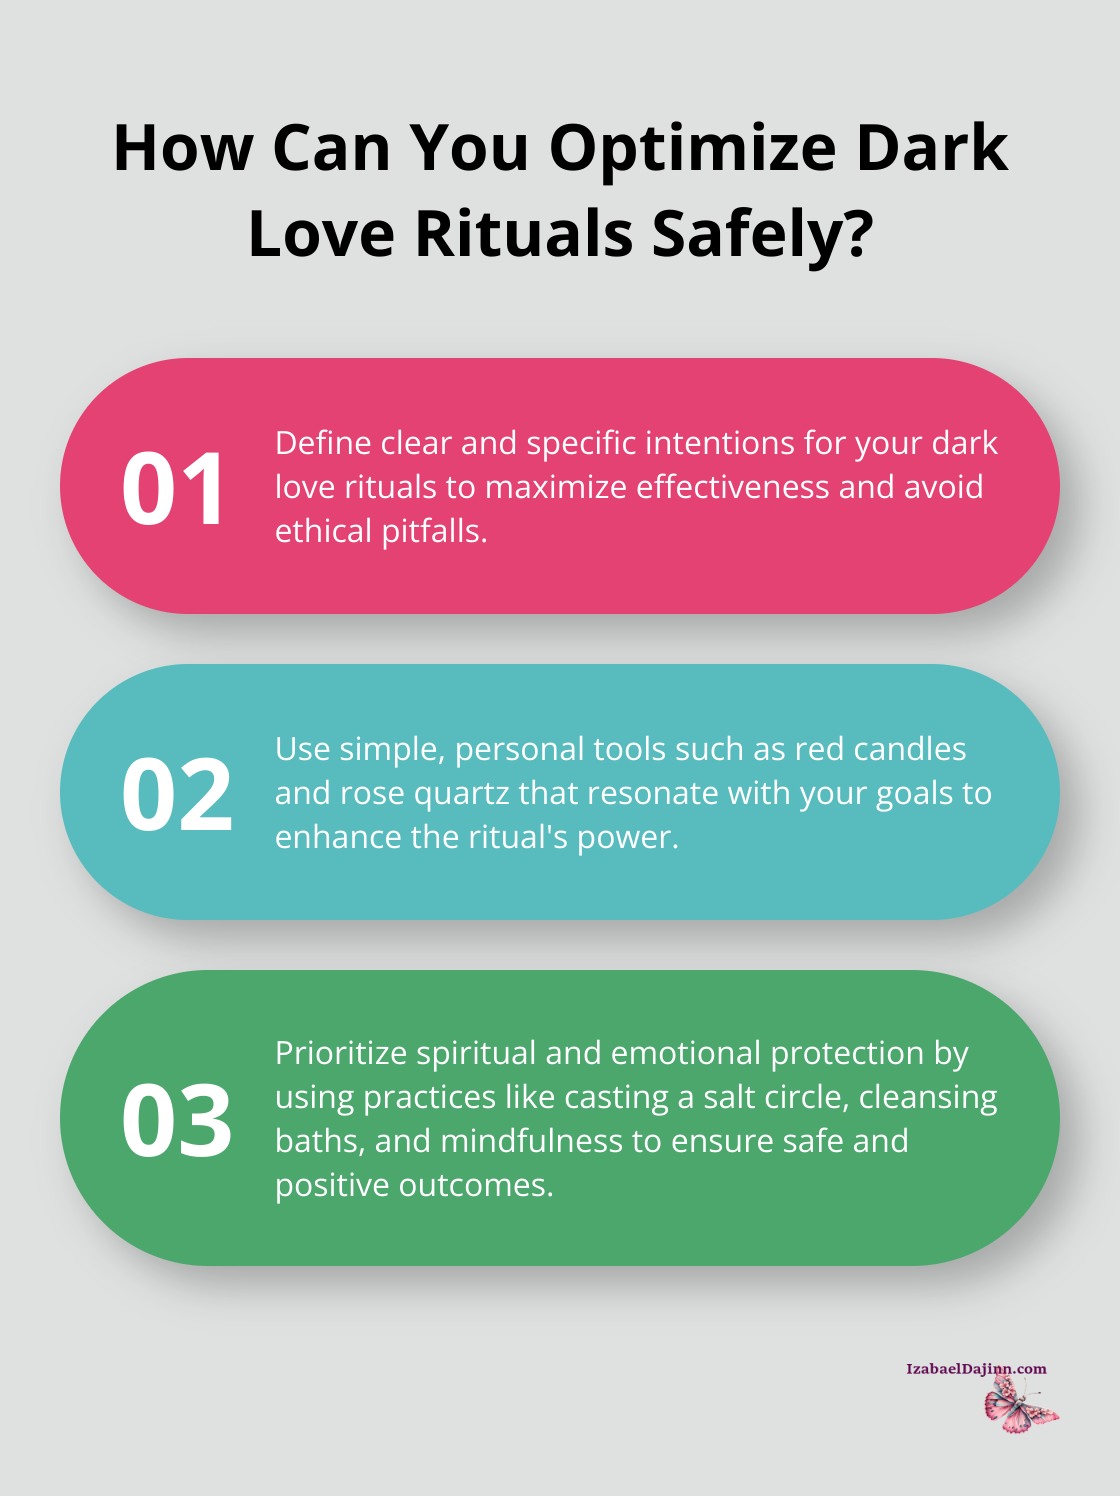 Fact - How Can You Optimize Dark Love Rituals Safely?